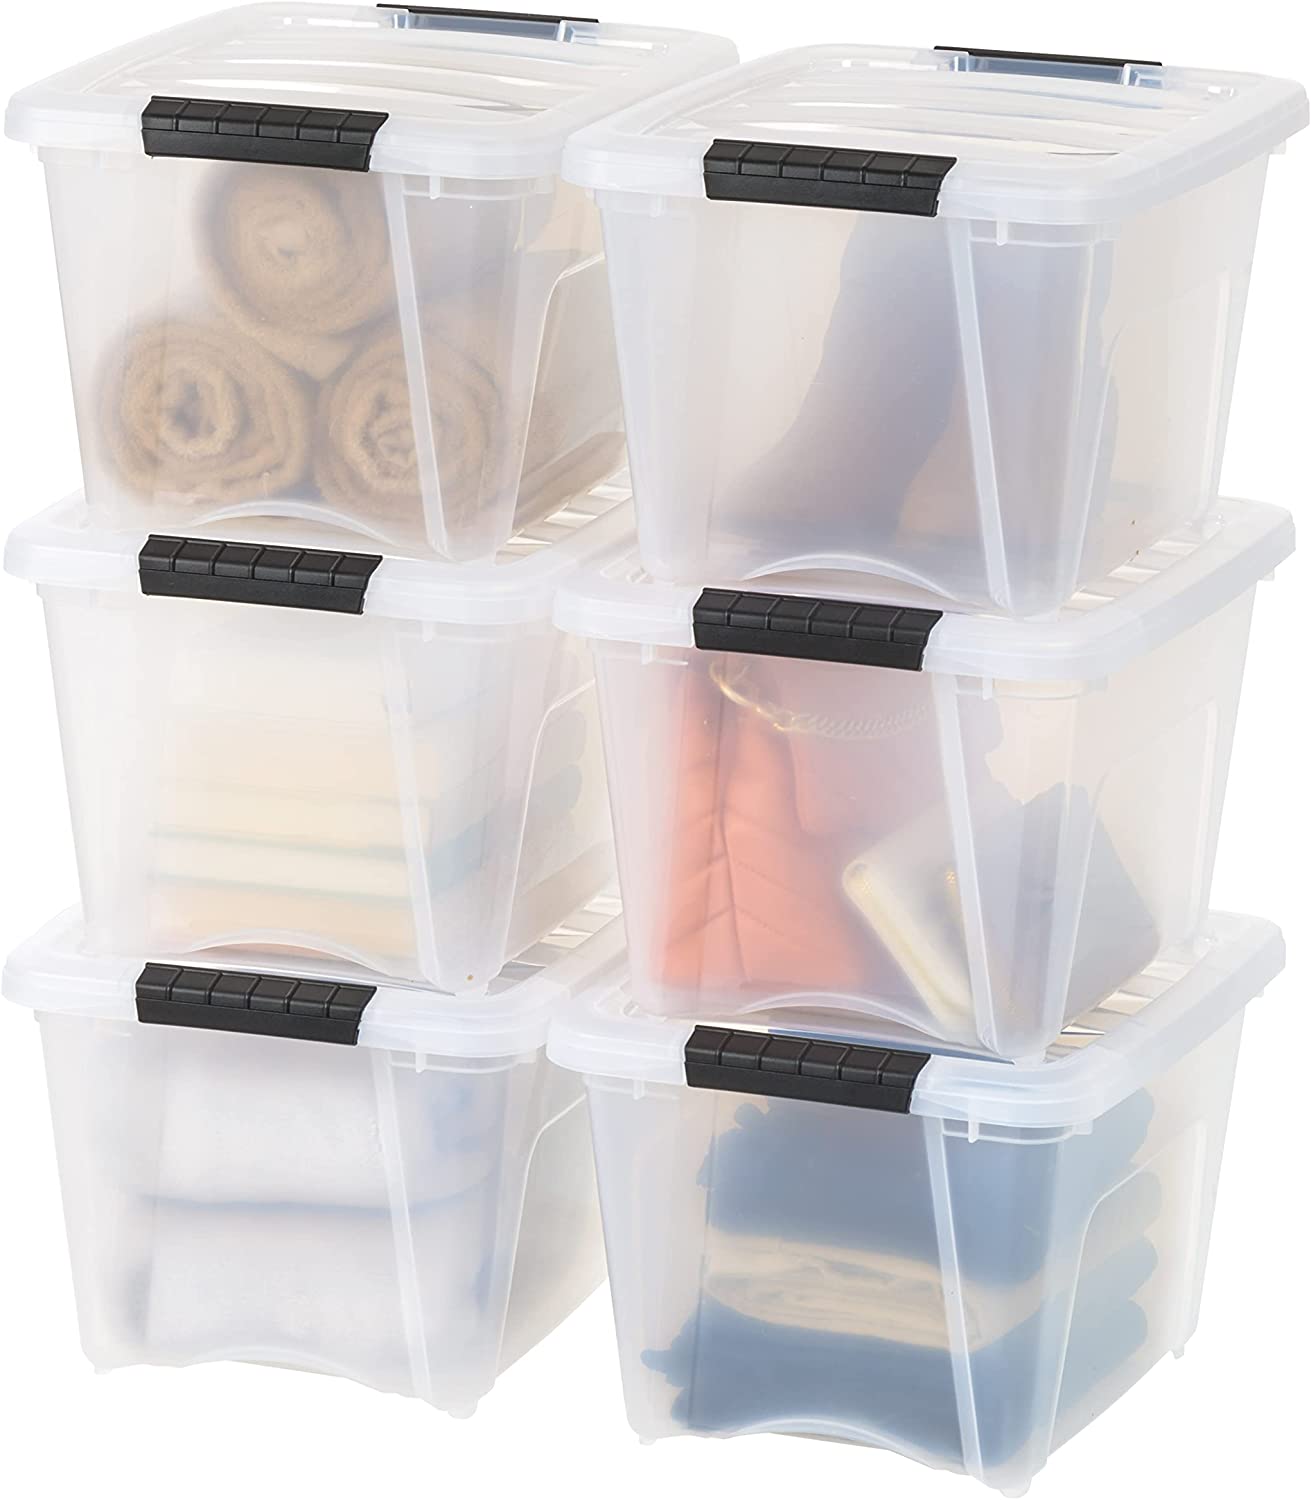 https://bigbigmart.com/wp-content/uploads/2023/06/IRIS-USA-19-Qt.-Plastic-Storage-Container-Bin-with-Secure-Lid-and-Latching-Buckles-6-pack-Clear-Durable-Stackable-Nestable-Organizing-Tote-Tub-Box-Toy-General-Organization-Small.jpg